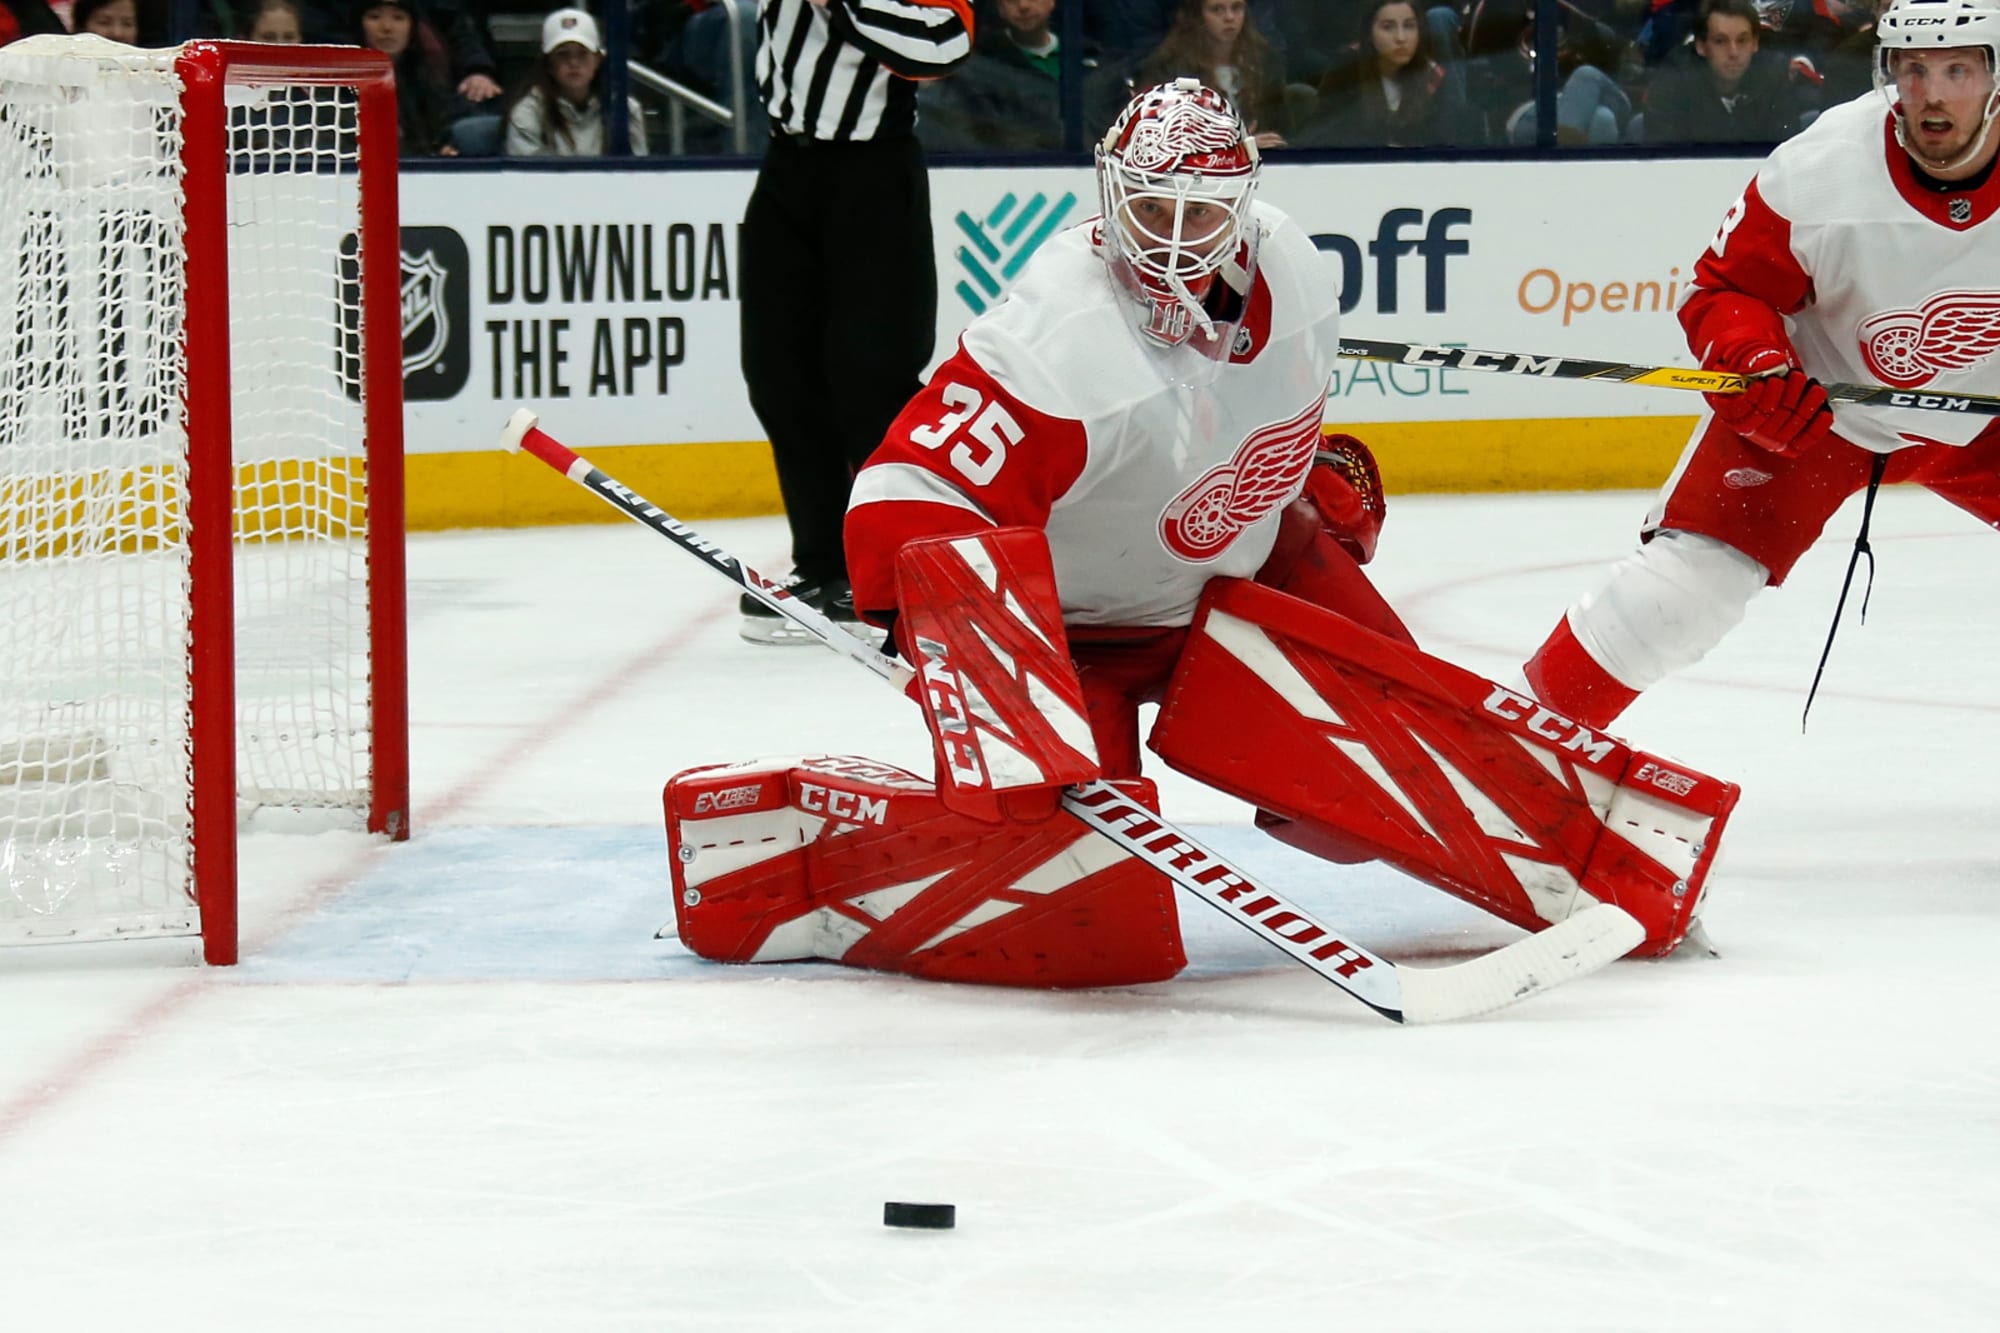 Q+A with Retired Detroit Red Wings Goaltender, Jimmy Howard